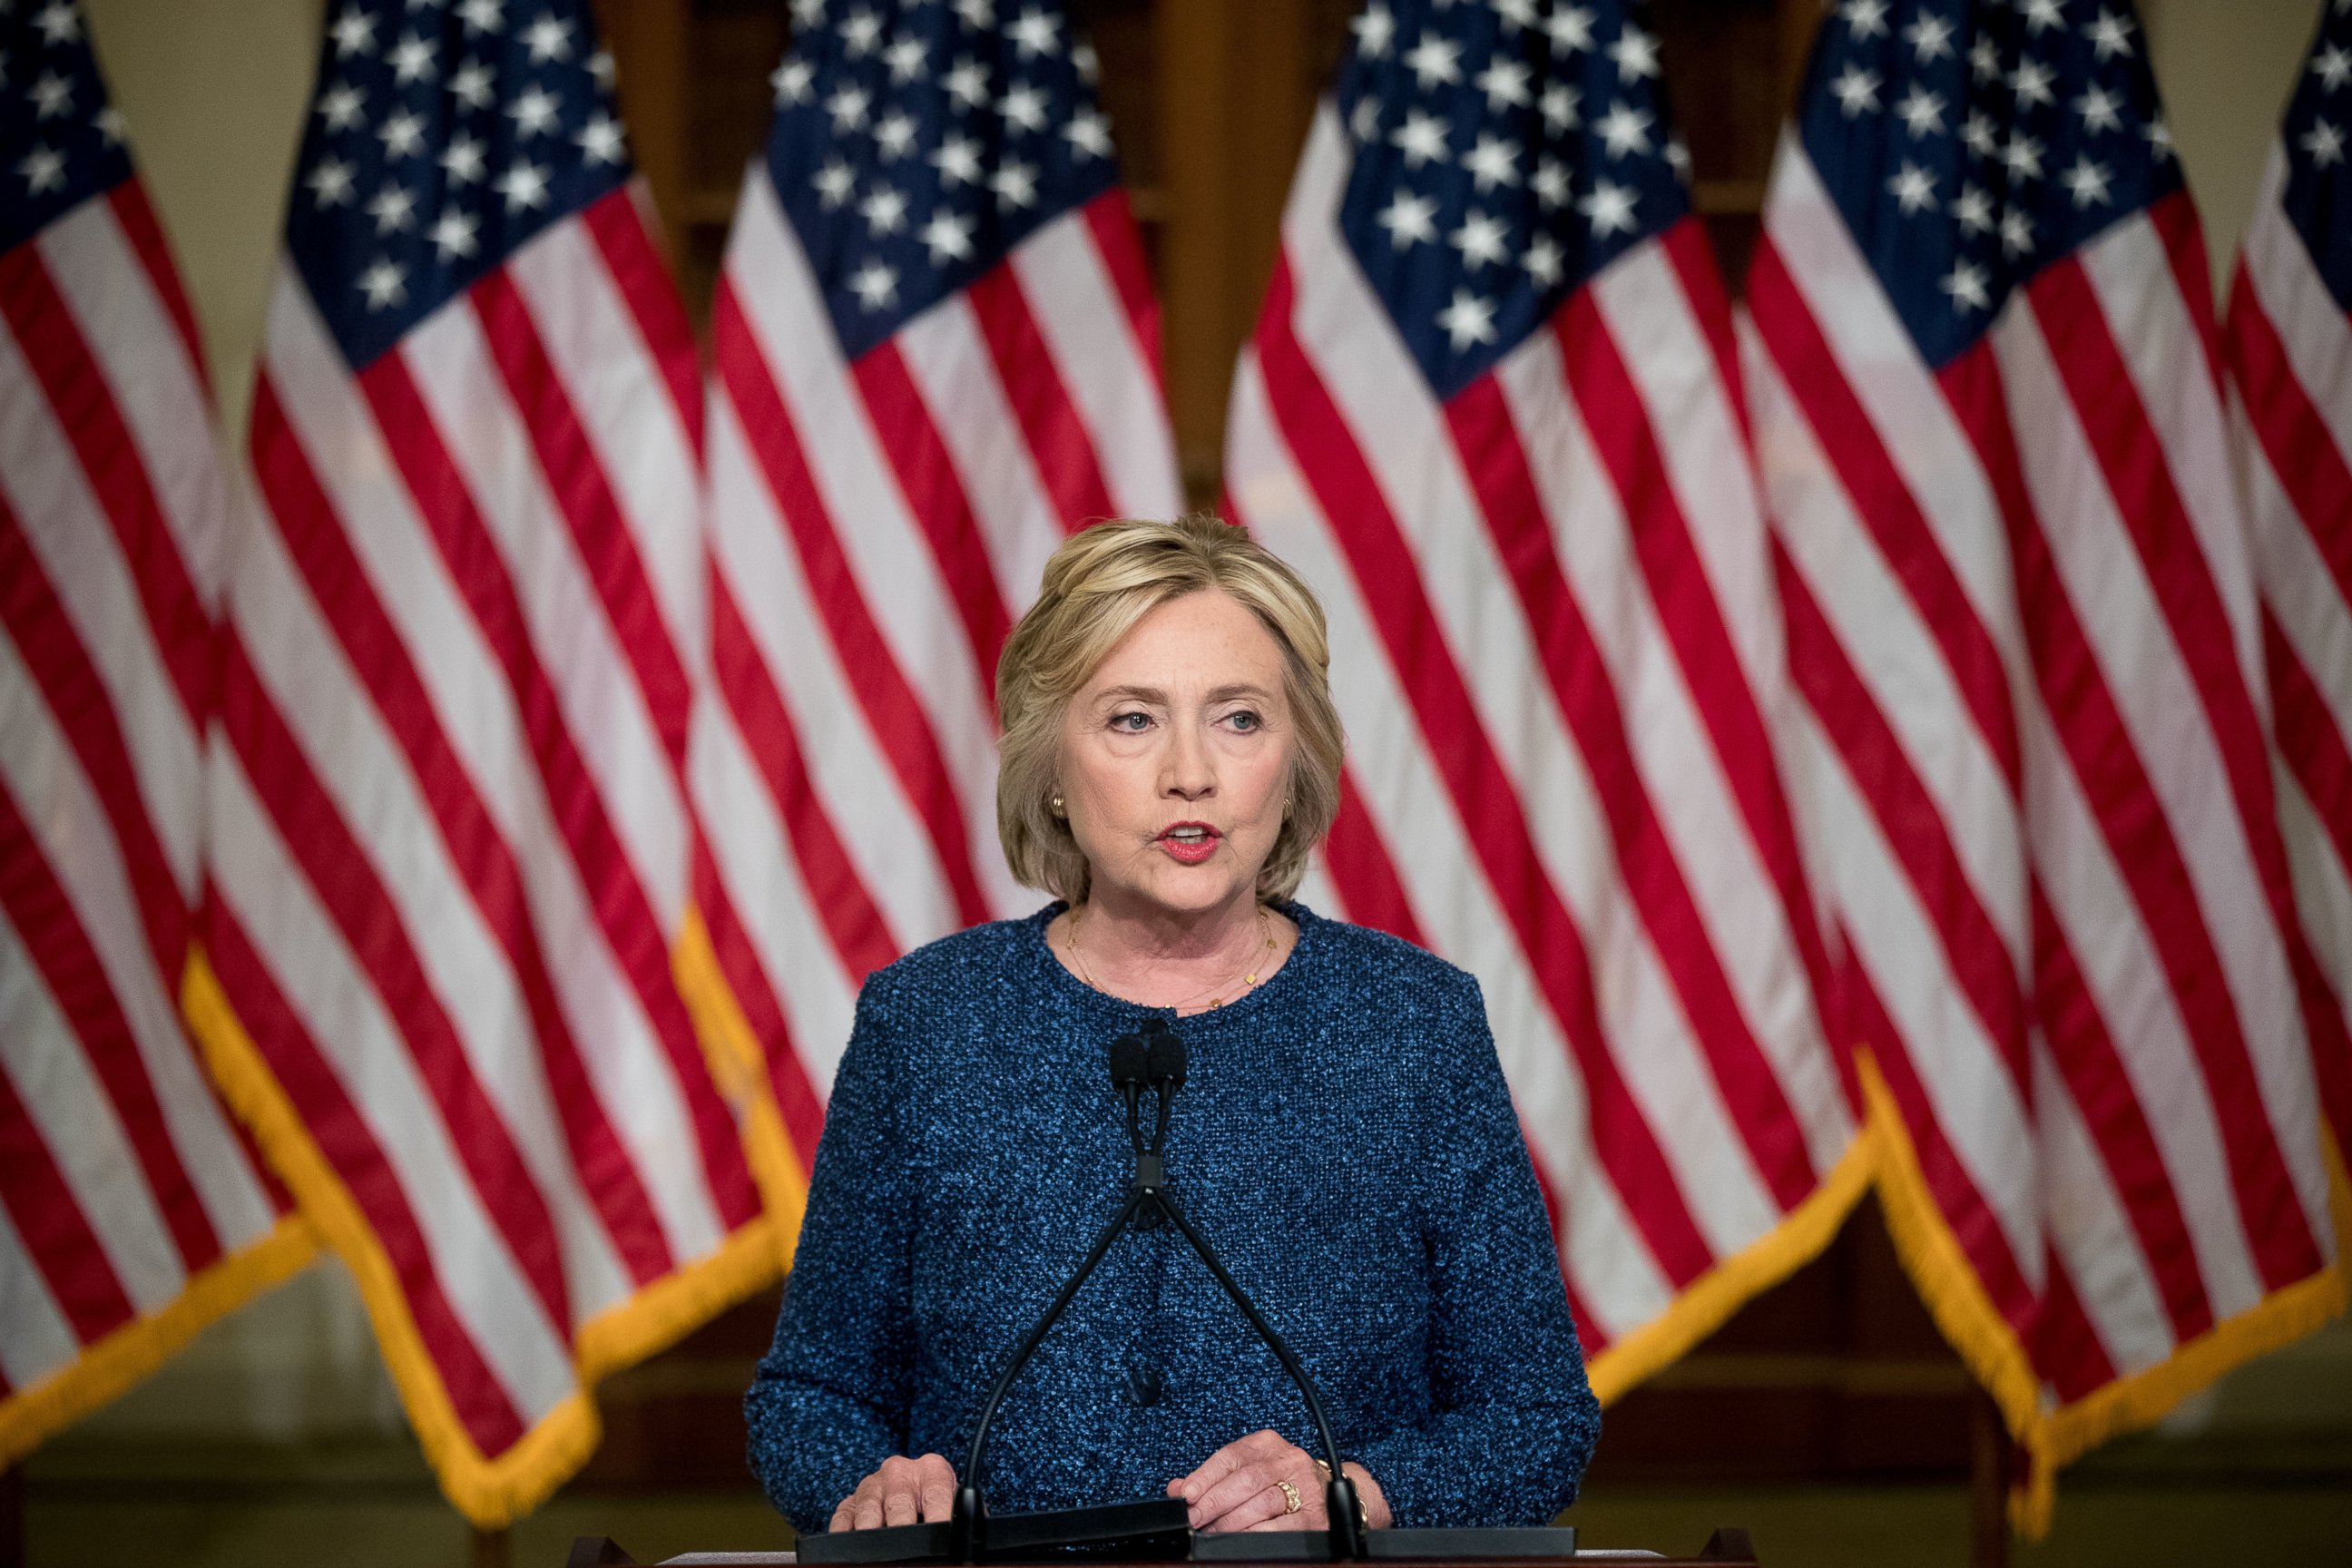 PHOTO: Democratic presidential nominee Hillary Clinton gives a statement to members of the media after attending a National Security working session at the Historical Society Library, in New York, Sept. 9, 2016.